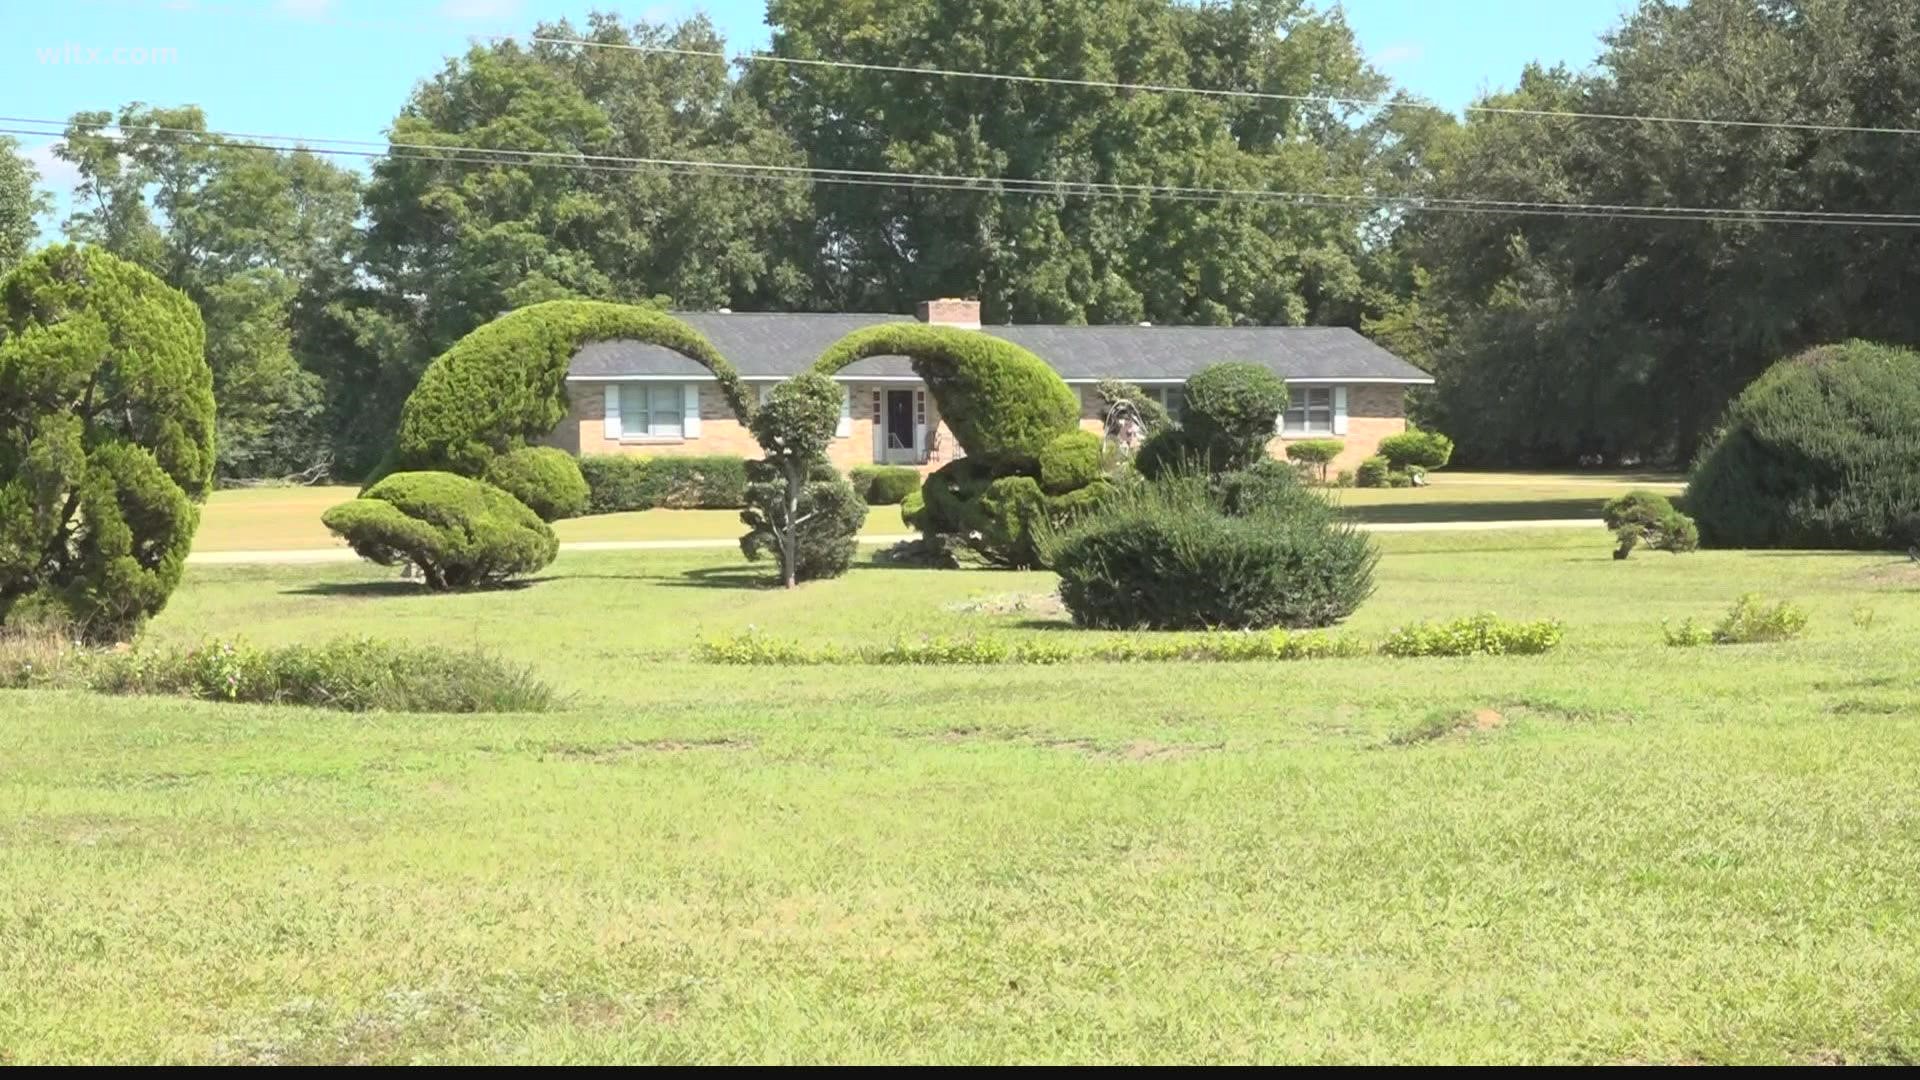 Pearl Fryar's topiary garden is must see in Bishopville, but as Fryar gets older, the community is rallying to help save his beautiful garden.